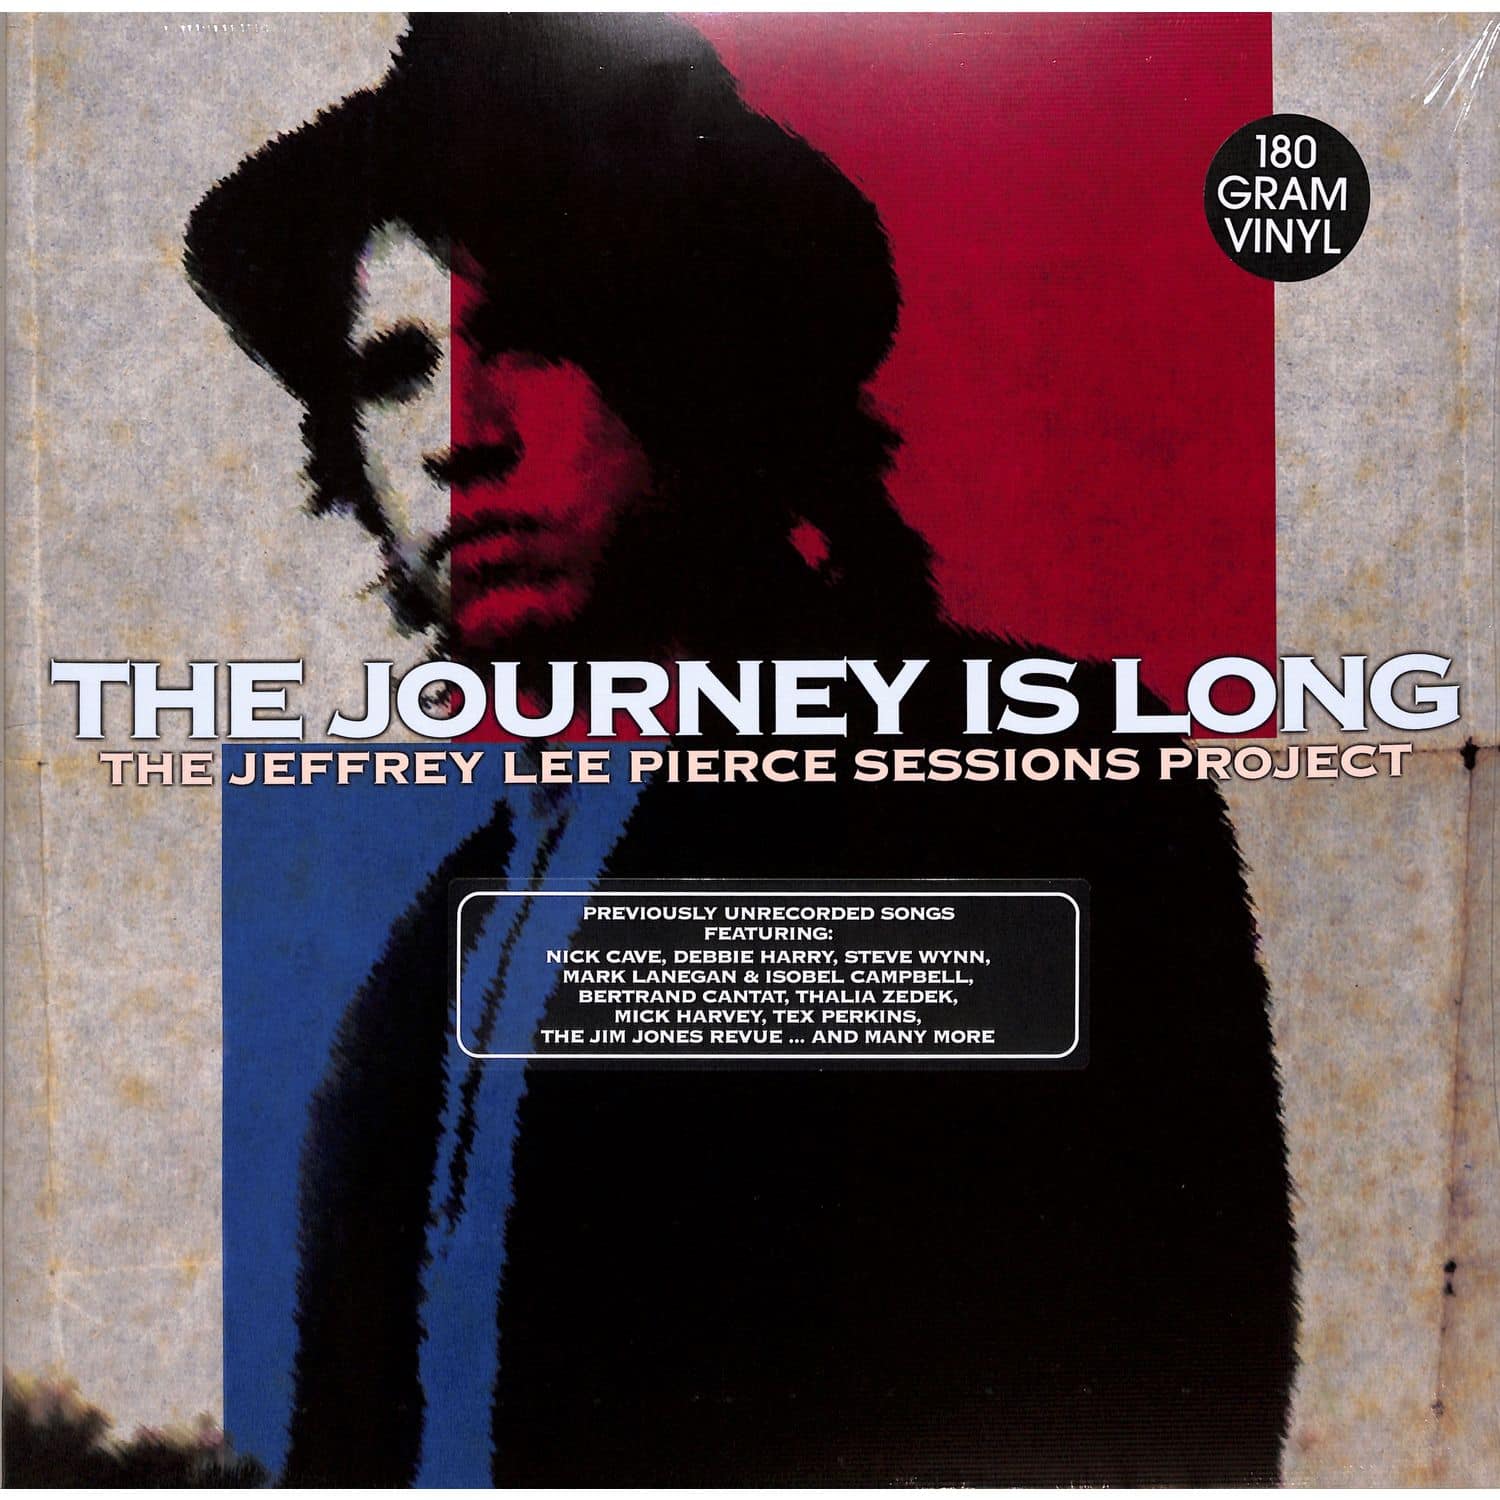 The Jeffrey Lee Pierce Sessions Project - THE JOURNEY IS LONG 